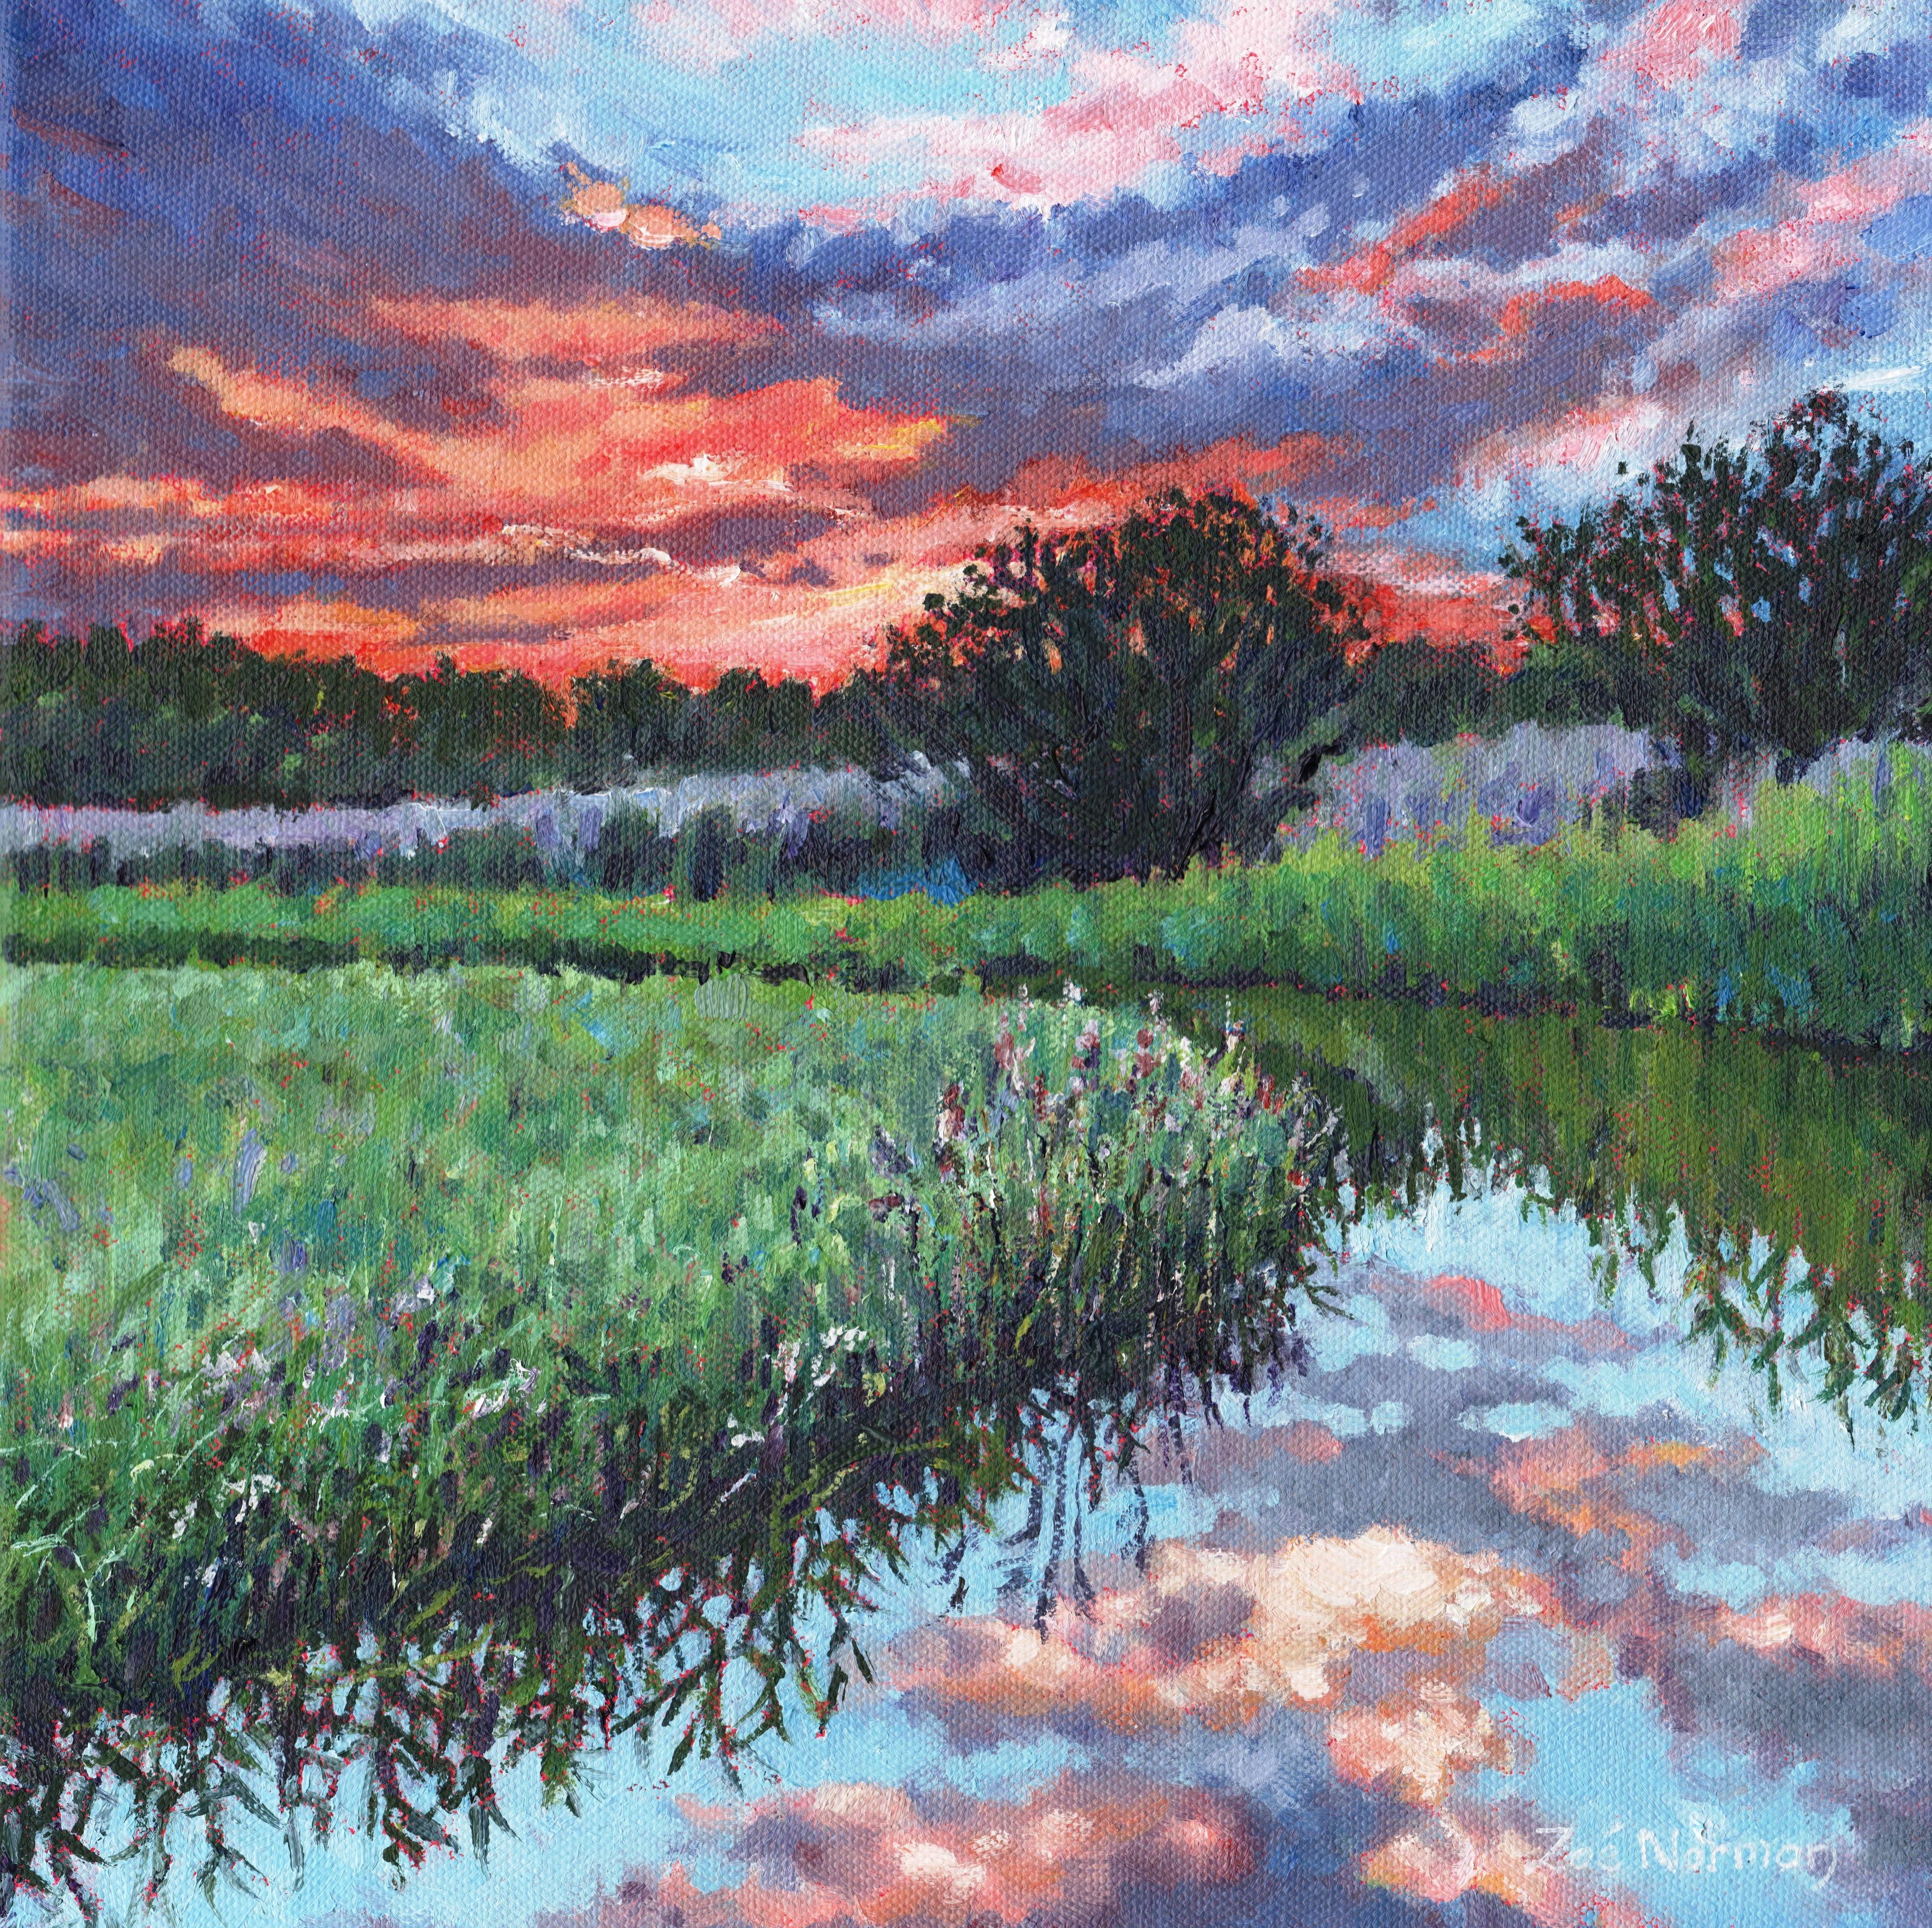 Contemporary Impressionism    An evening sunset over the Norfolk Broads. There are few places more tranquil and nostalgic than Norfolk's beautiful waterways and marshes. This little painting continues around the edges so framing is optional.    Your